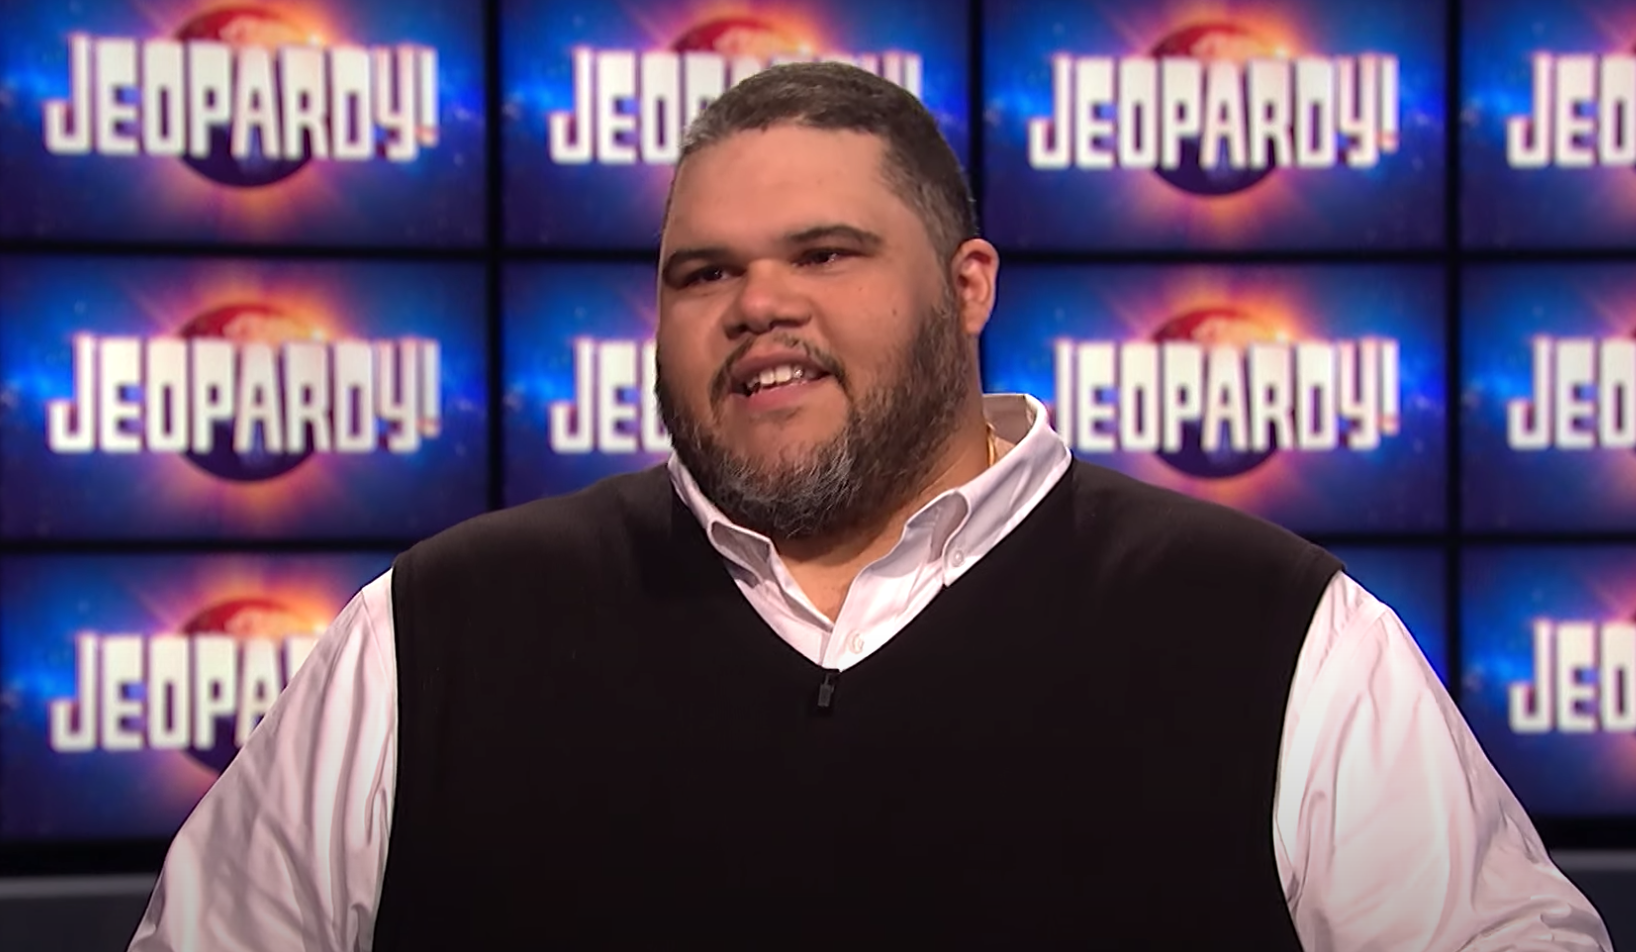 ‘Jeopardy!’: Ryan Long Expresses His Gratitude on Twitter After His 16-Game Winning Streak Ends